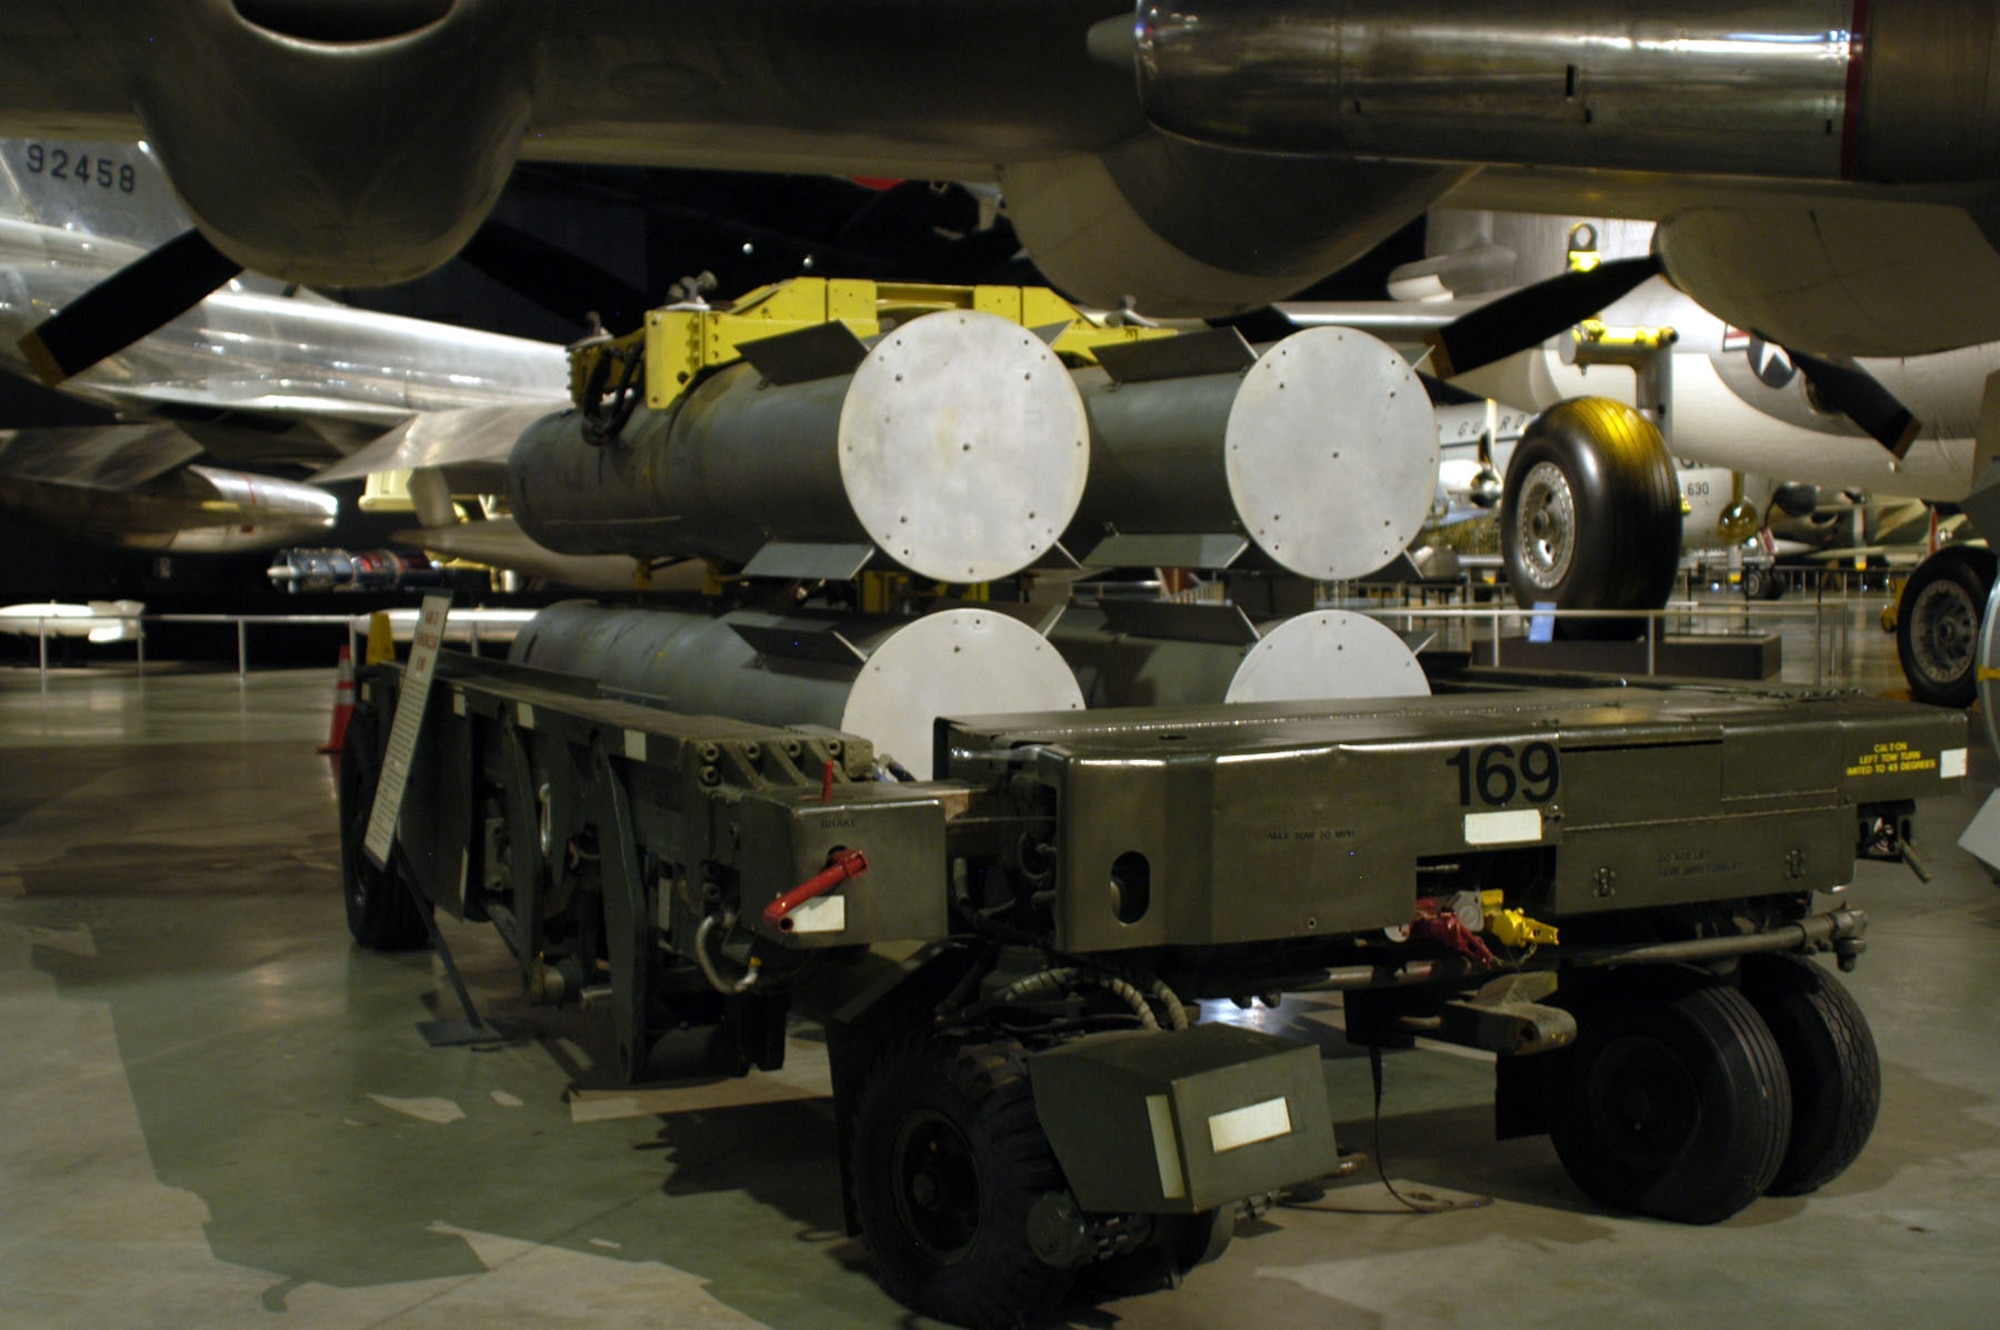 DAYTON, Ohio -- MHU-7/M Bomb Lift Trailer on display in the Cold War Gallery at the National Museum of the United States Air Force. (U.S. Air Force photo)